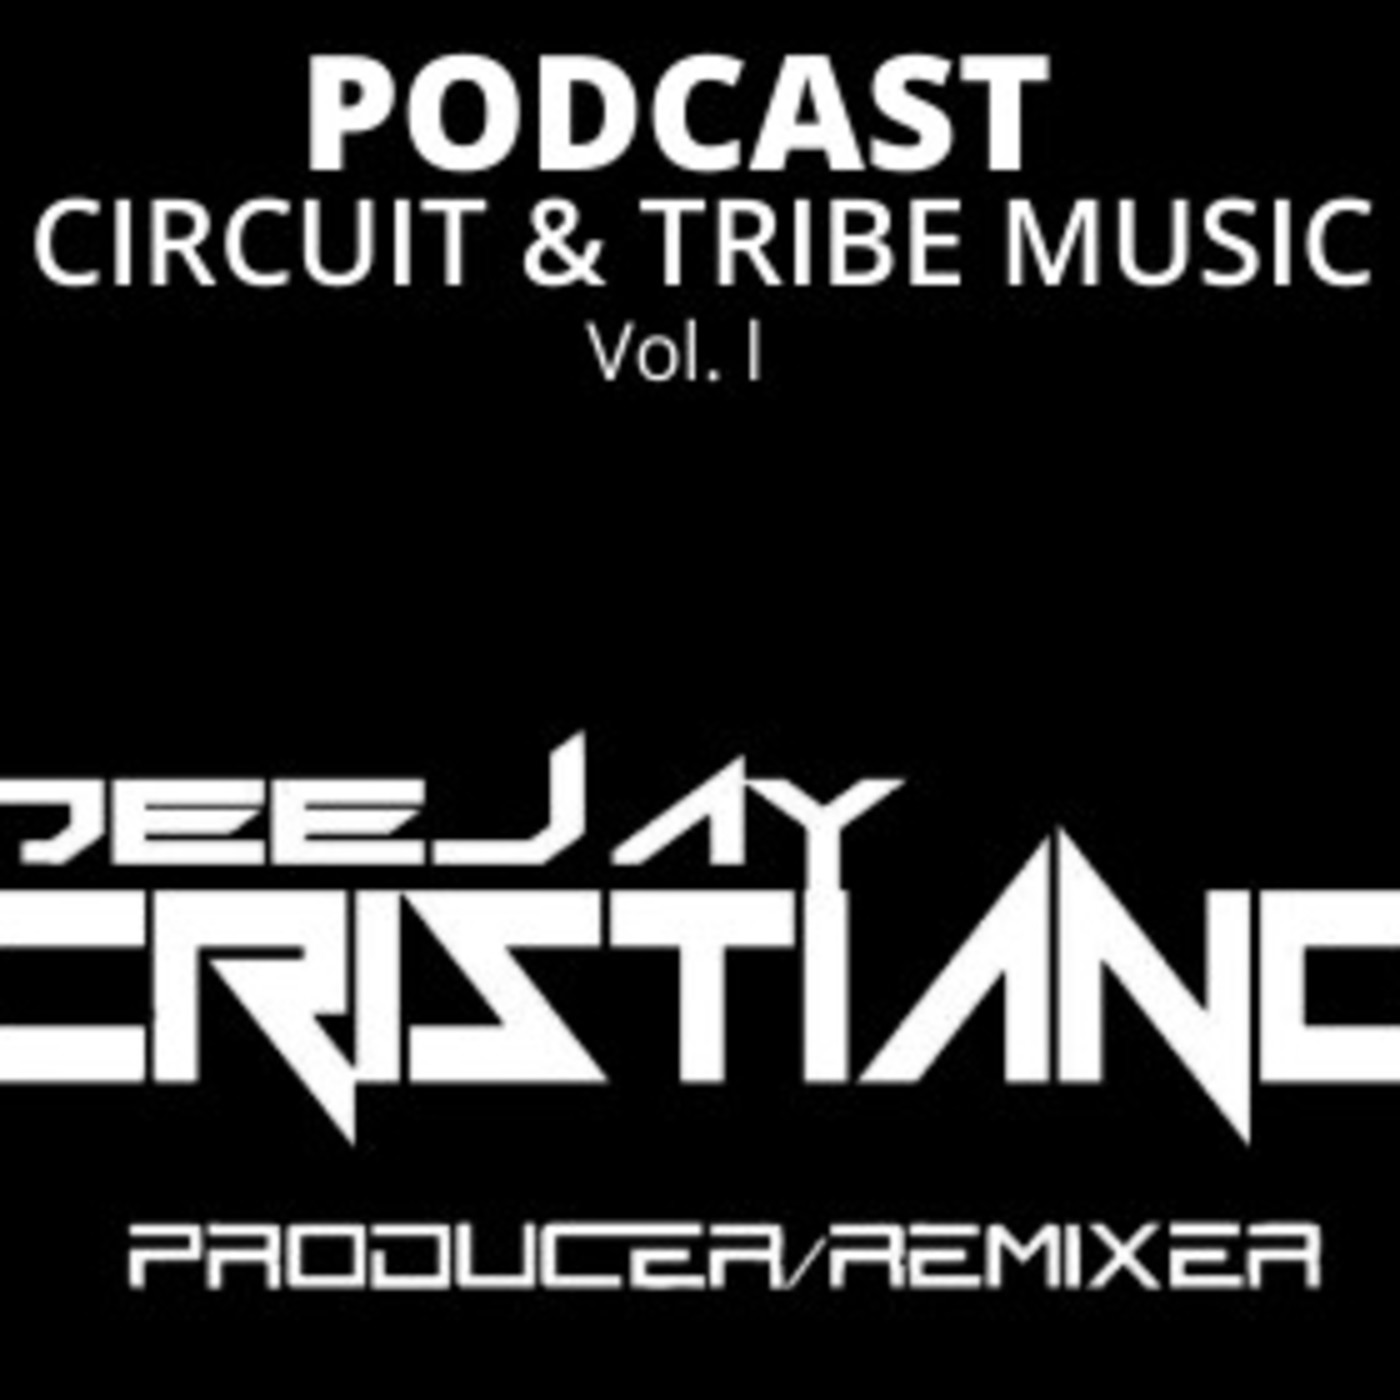 PODCAST CIRCUIT & TRIBE DEEJAY CRIZTIANO